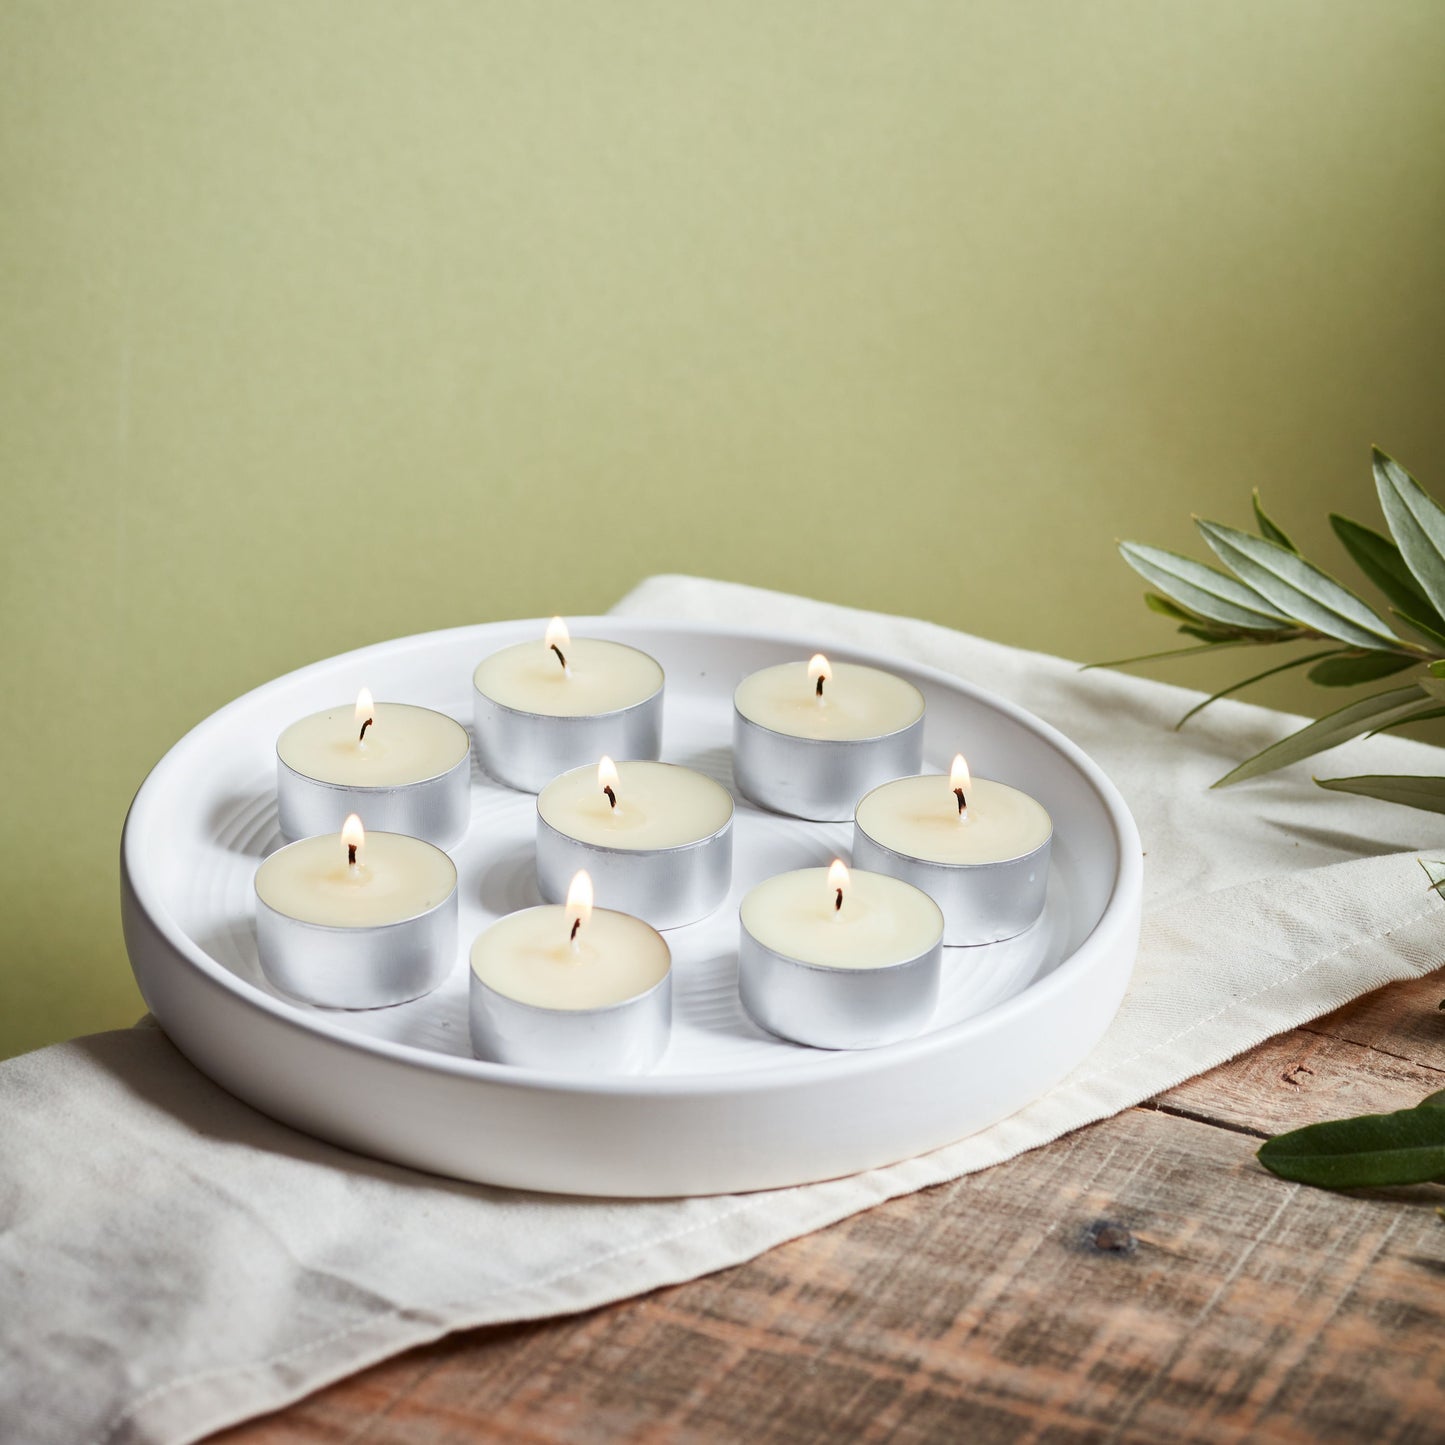 Orange Blossom Scented Tealight Candles